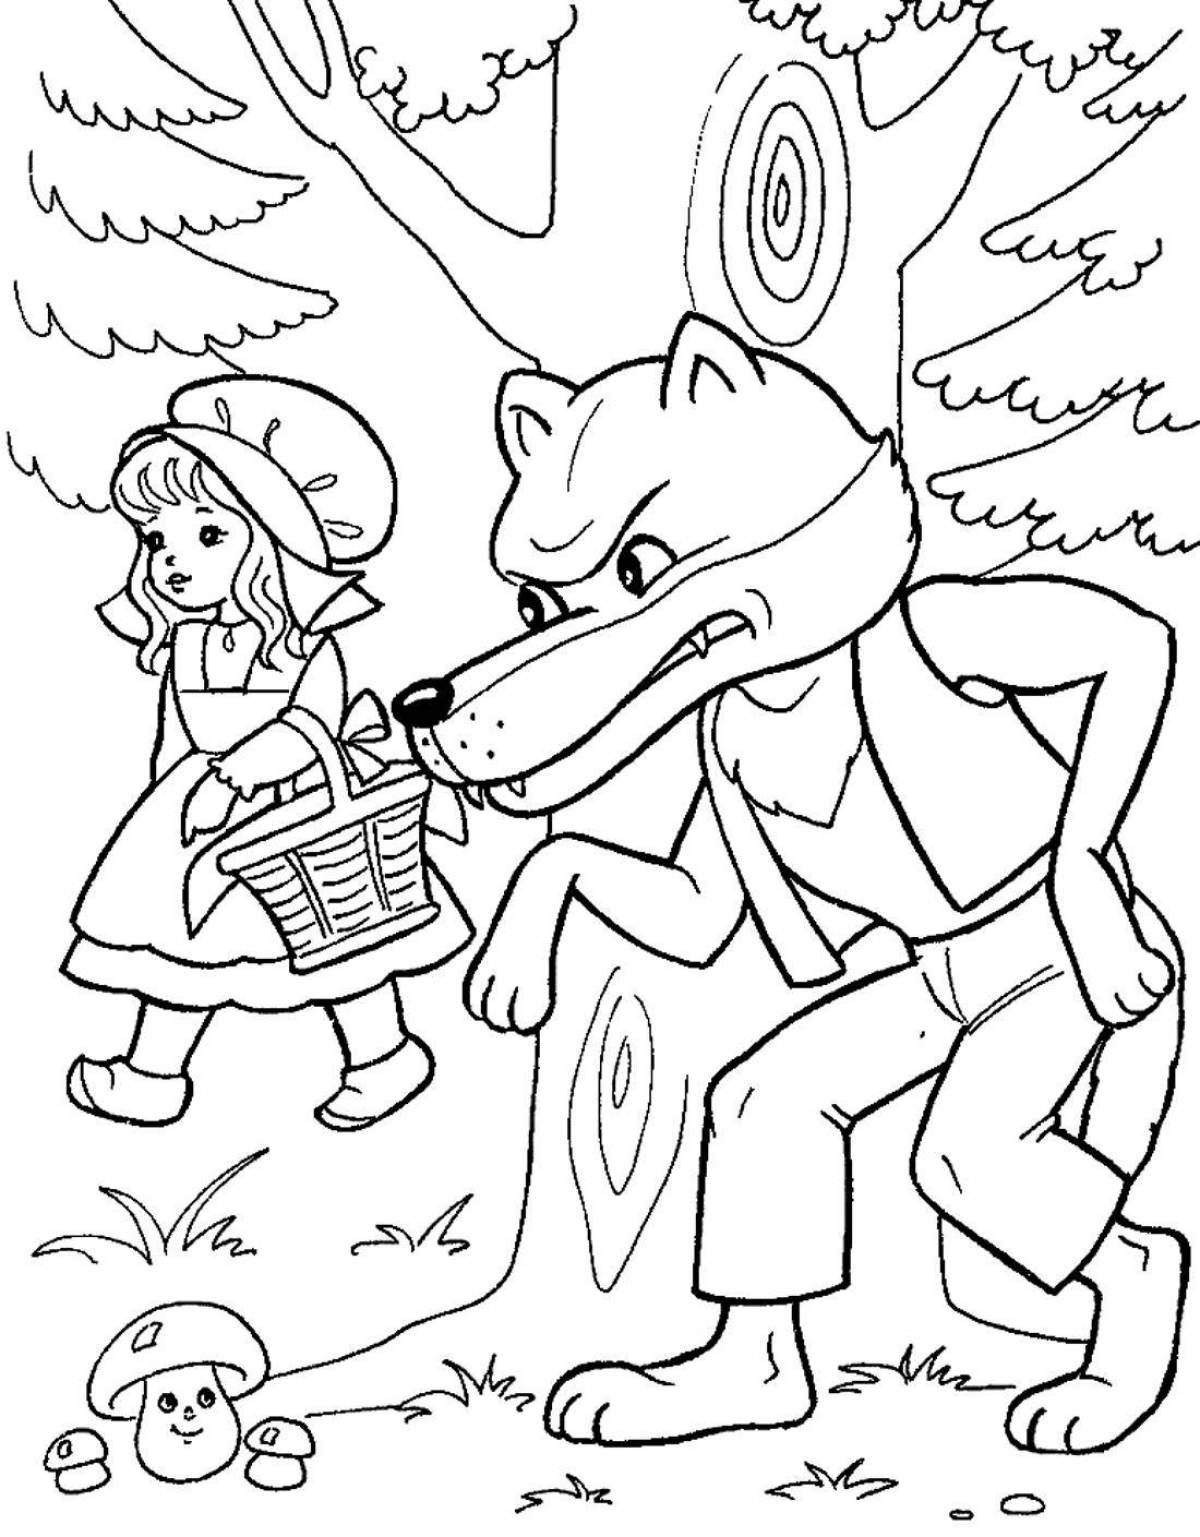 Exquisite little red riding hood coloring book